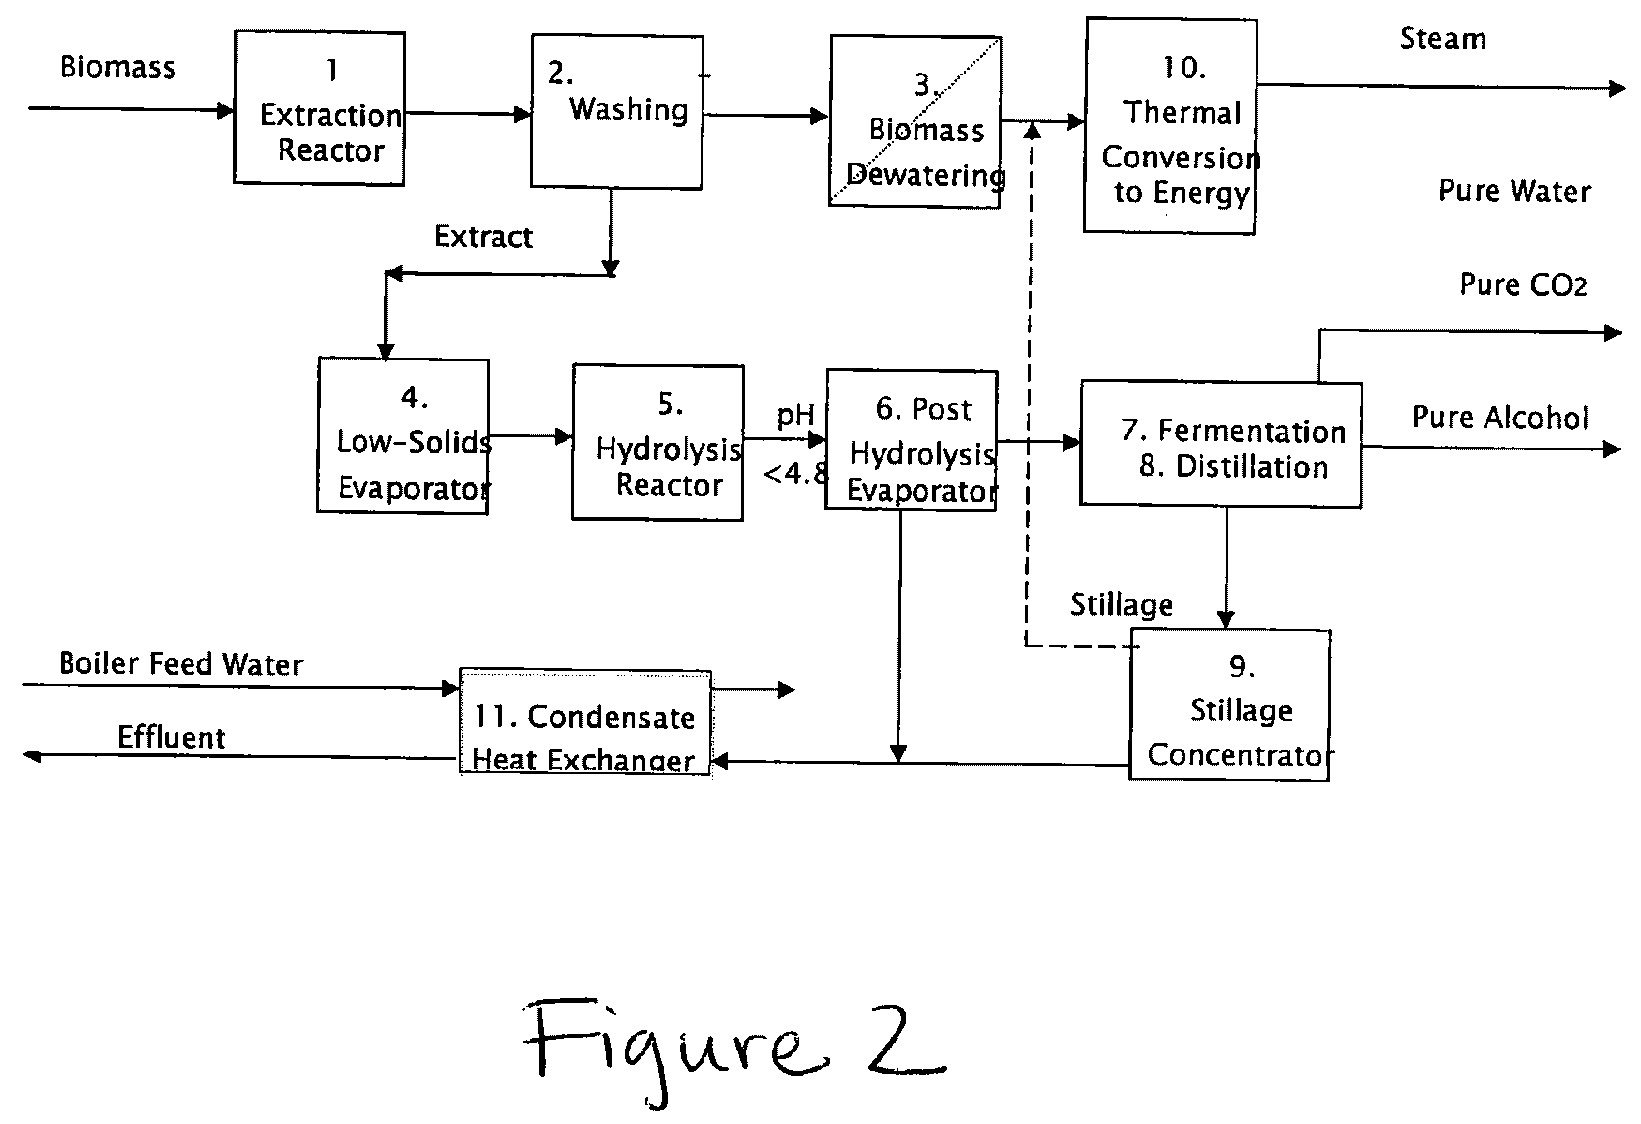 Process for producing hemicellulose sugars and energy from biomass